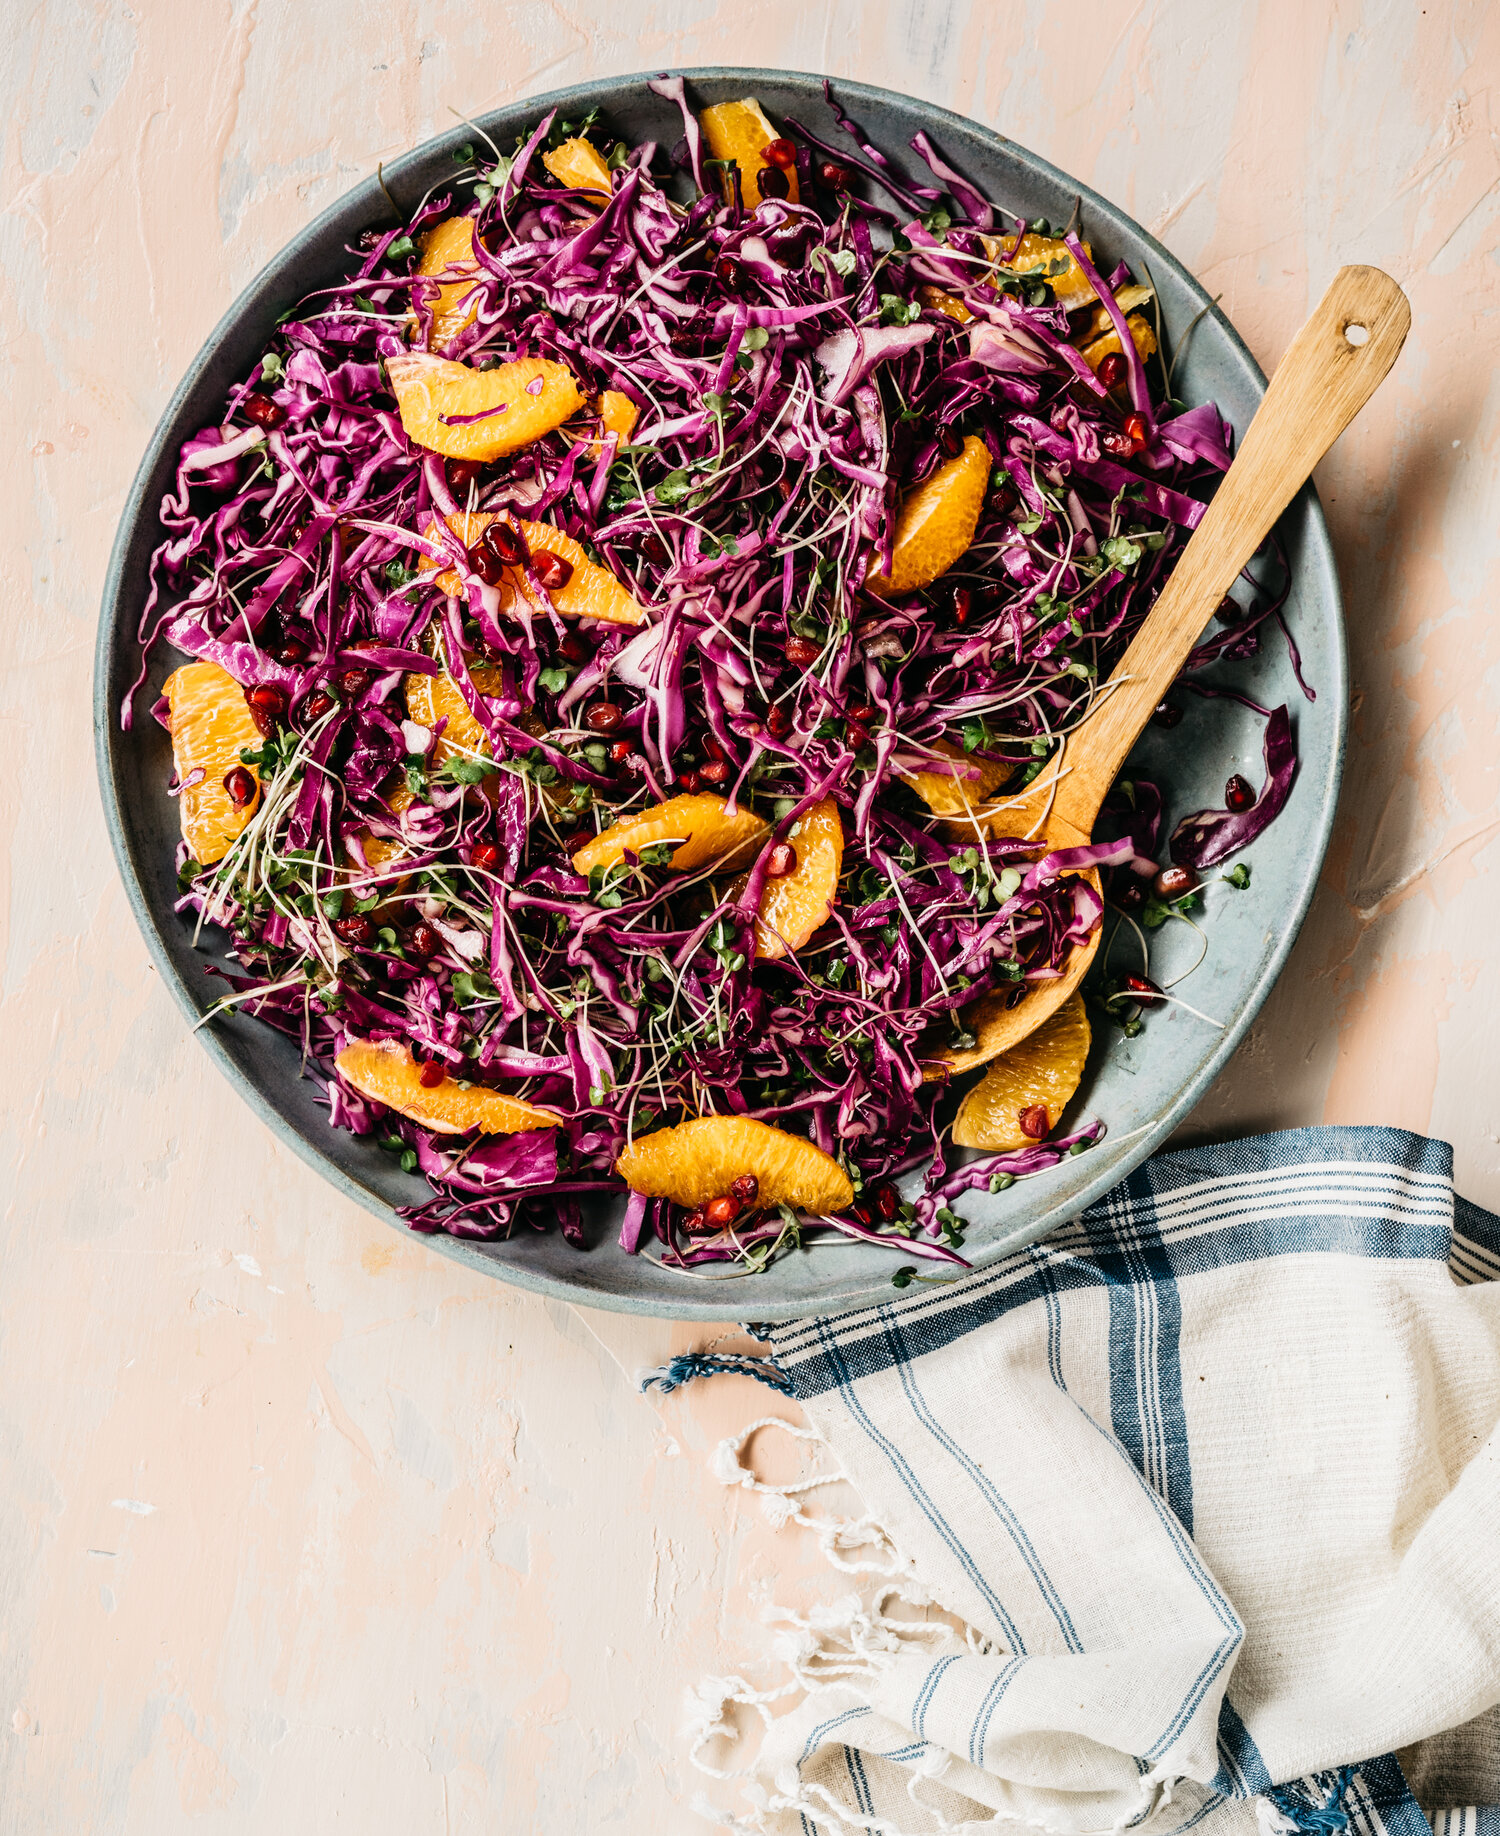 Red Cabbage And Microgreen Salad With Citrus And Pomegranate Seeds Edible Boston,Broccolette Nutrition